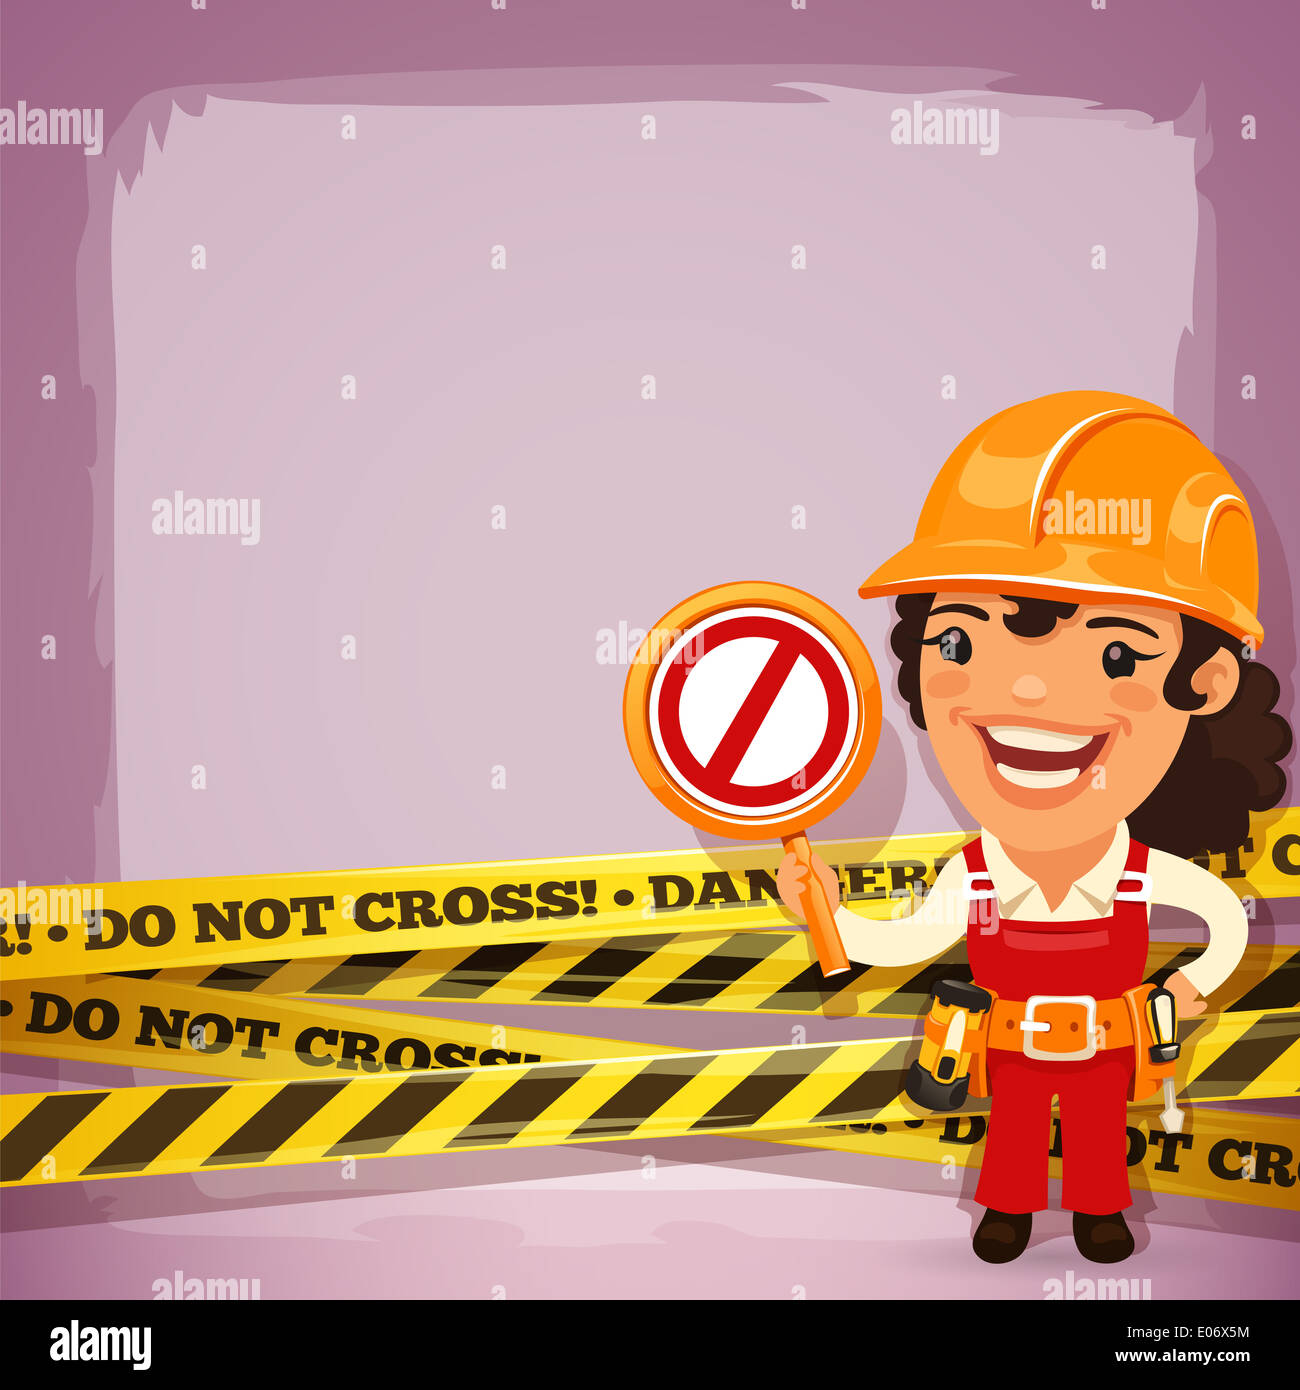 Female Builder With Danger Tapes. In the EPS file, each element is grouped separately. Stock Photo